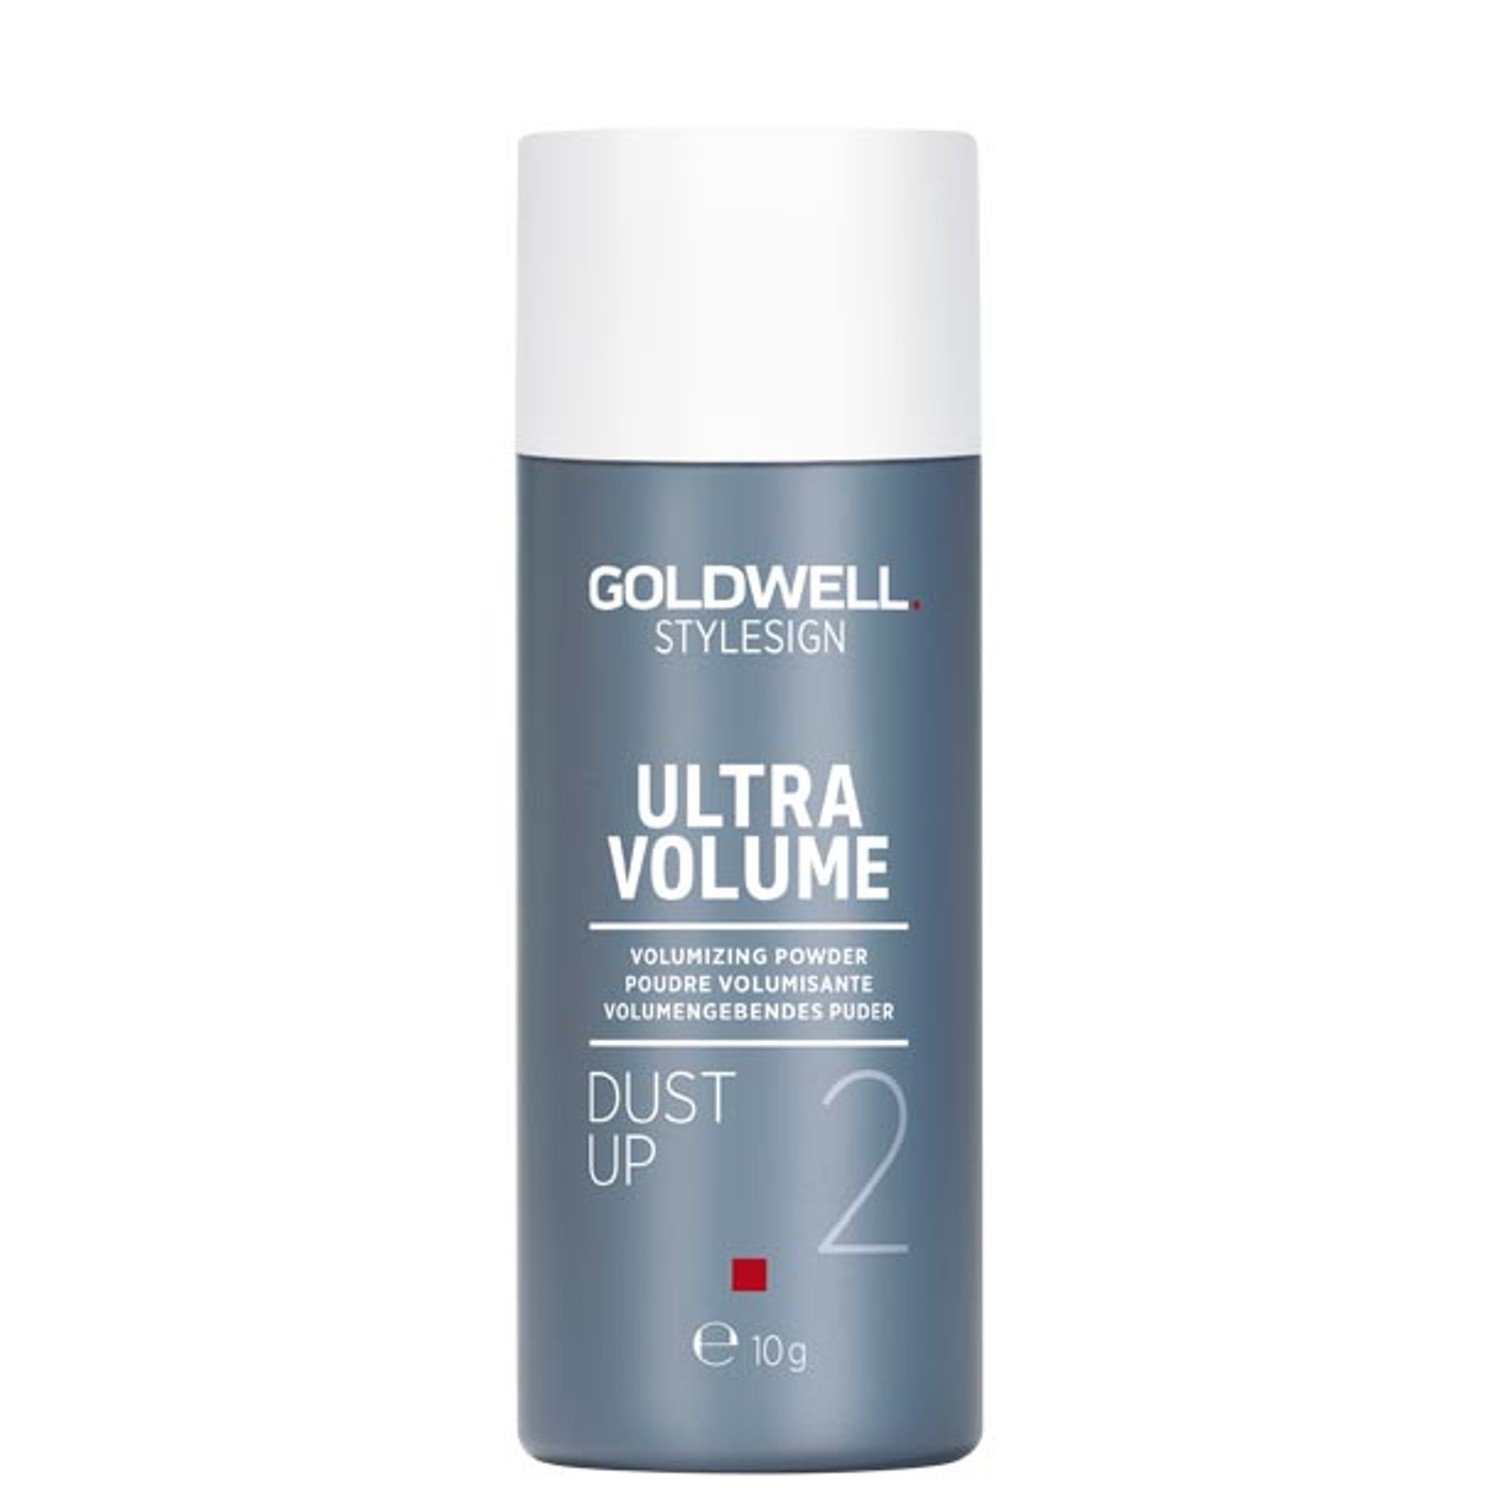 GOLDWELL Style Sign Ultra Volume Dust Up 10 g